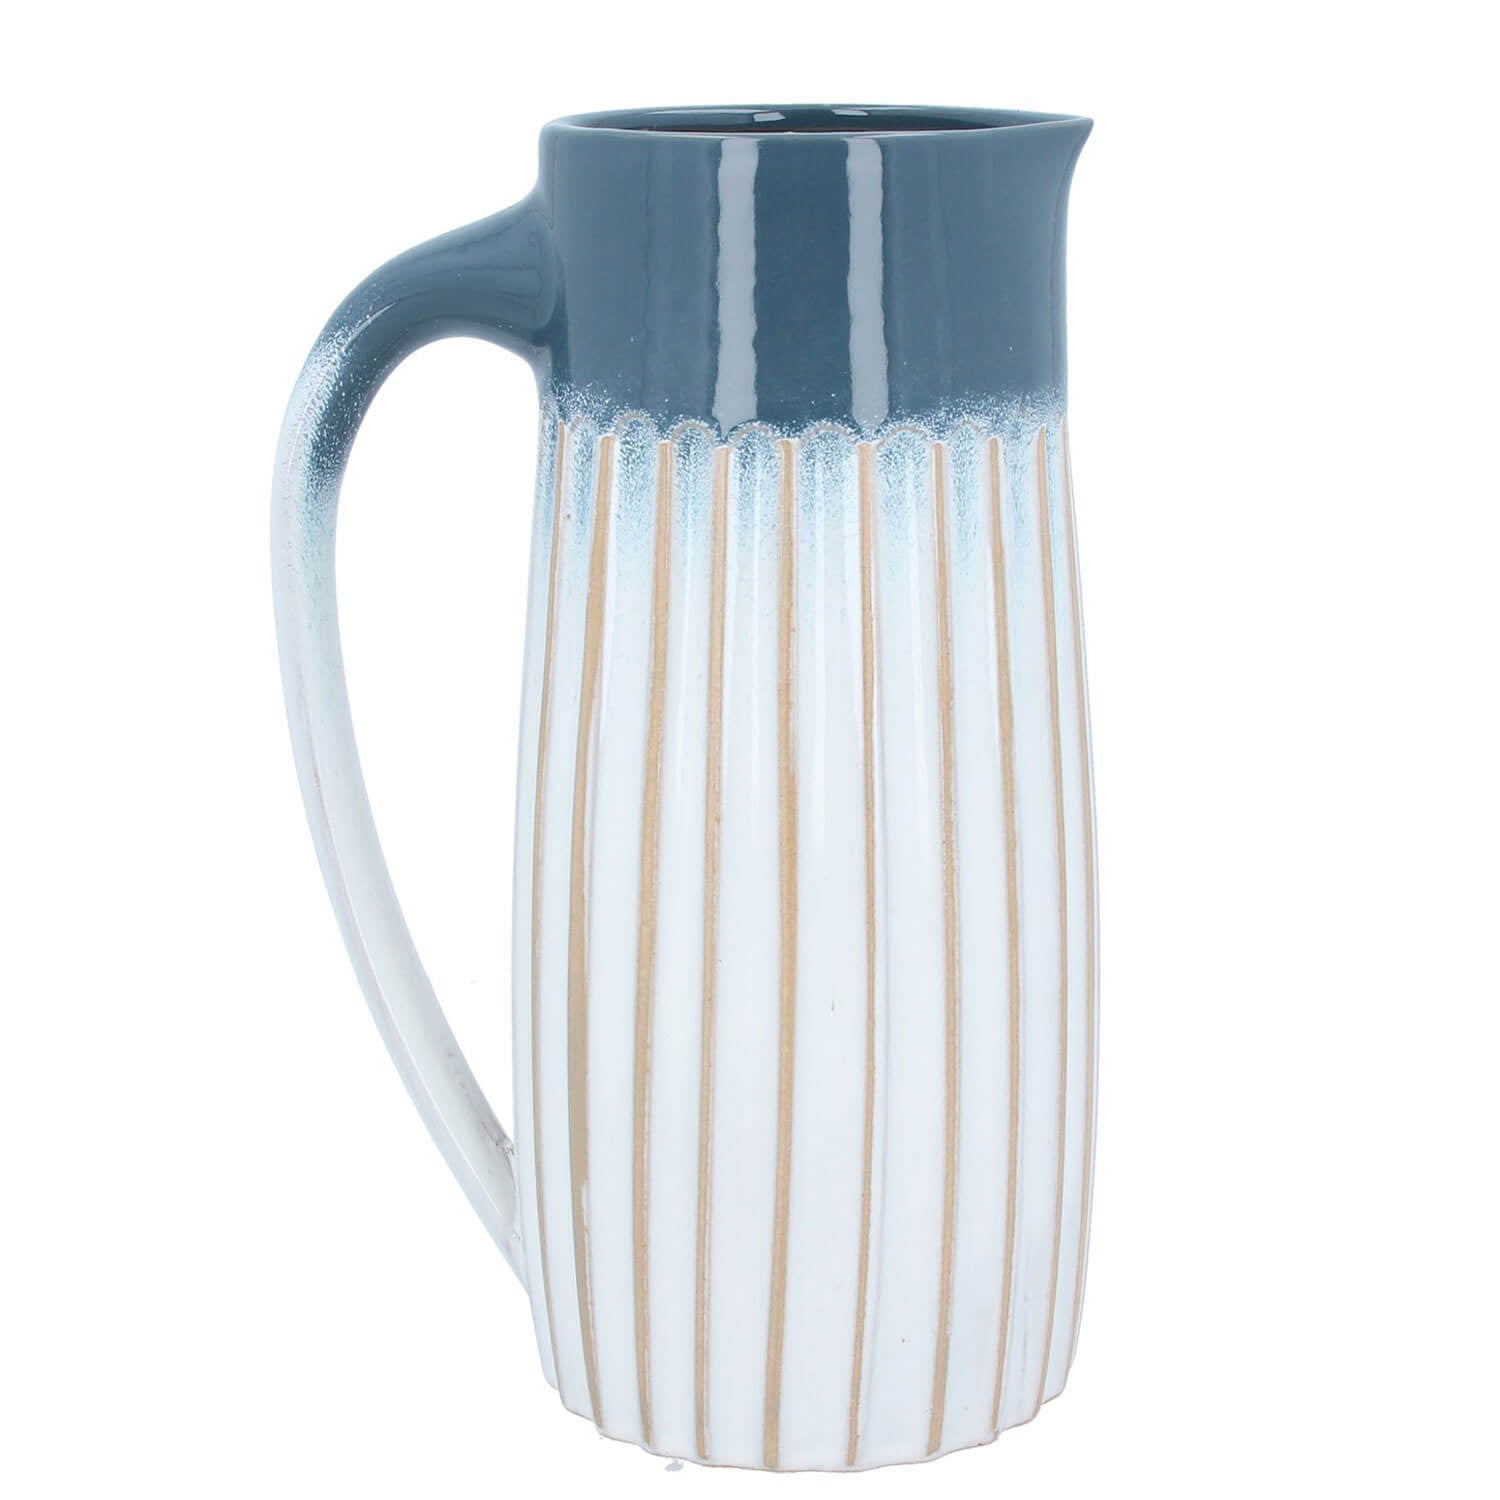 Gisella Graham Blue Ombre Ceramic Ribbed Jug - Large 1 Shaws Department Stores